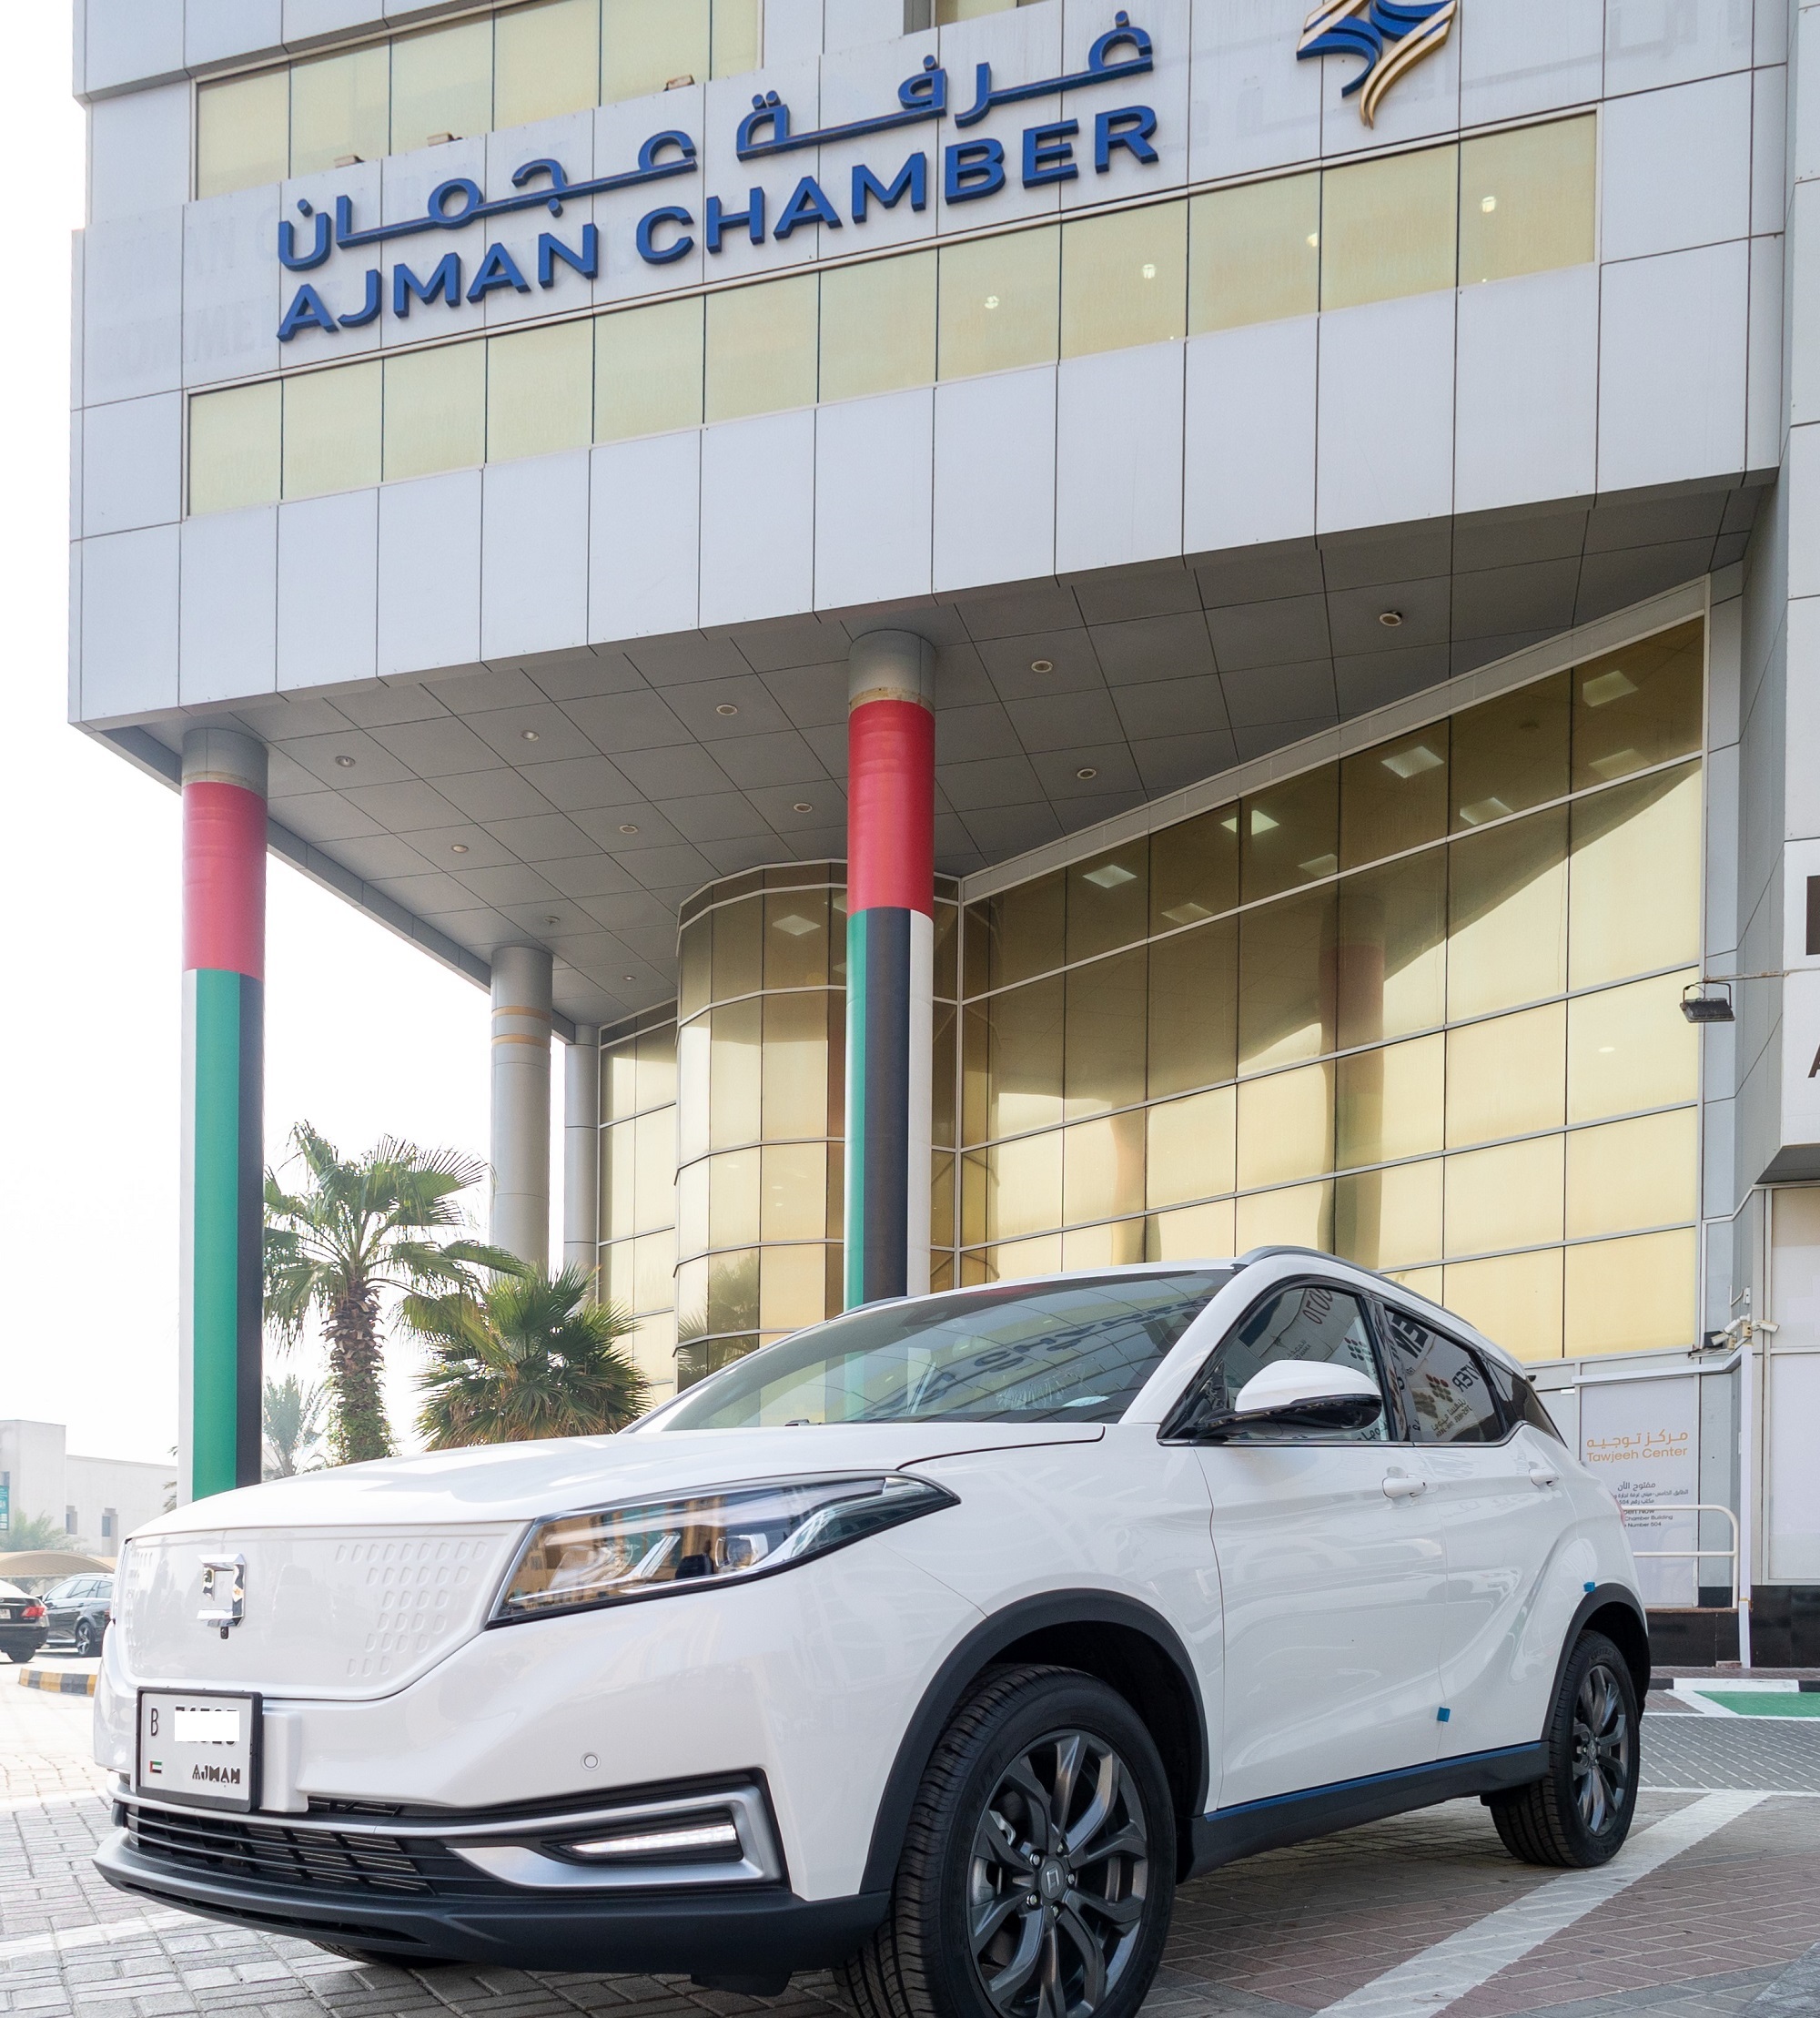 "Al Damani" is the first electric car adopted by the Ajman Chamber